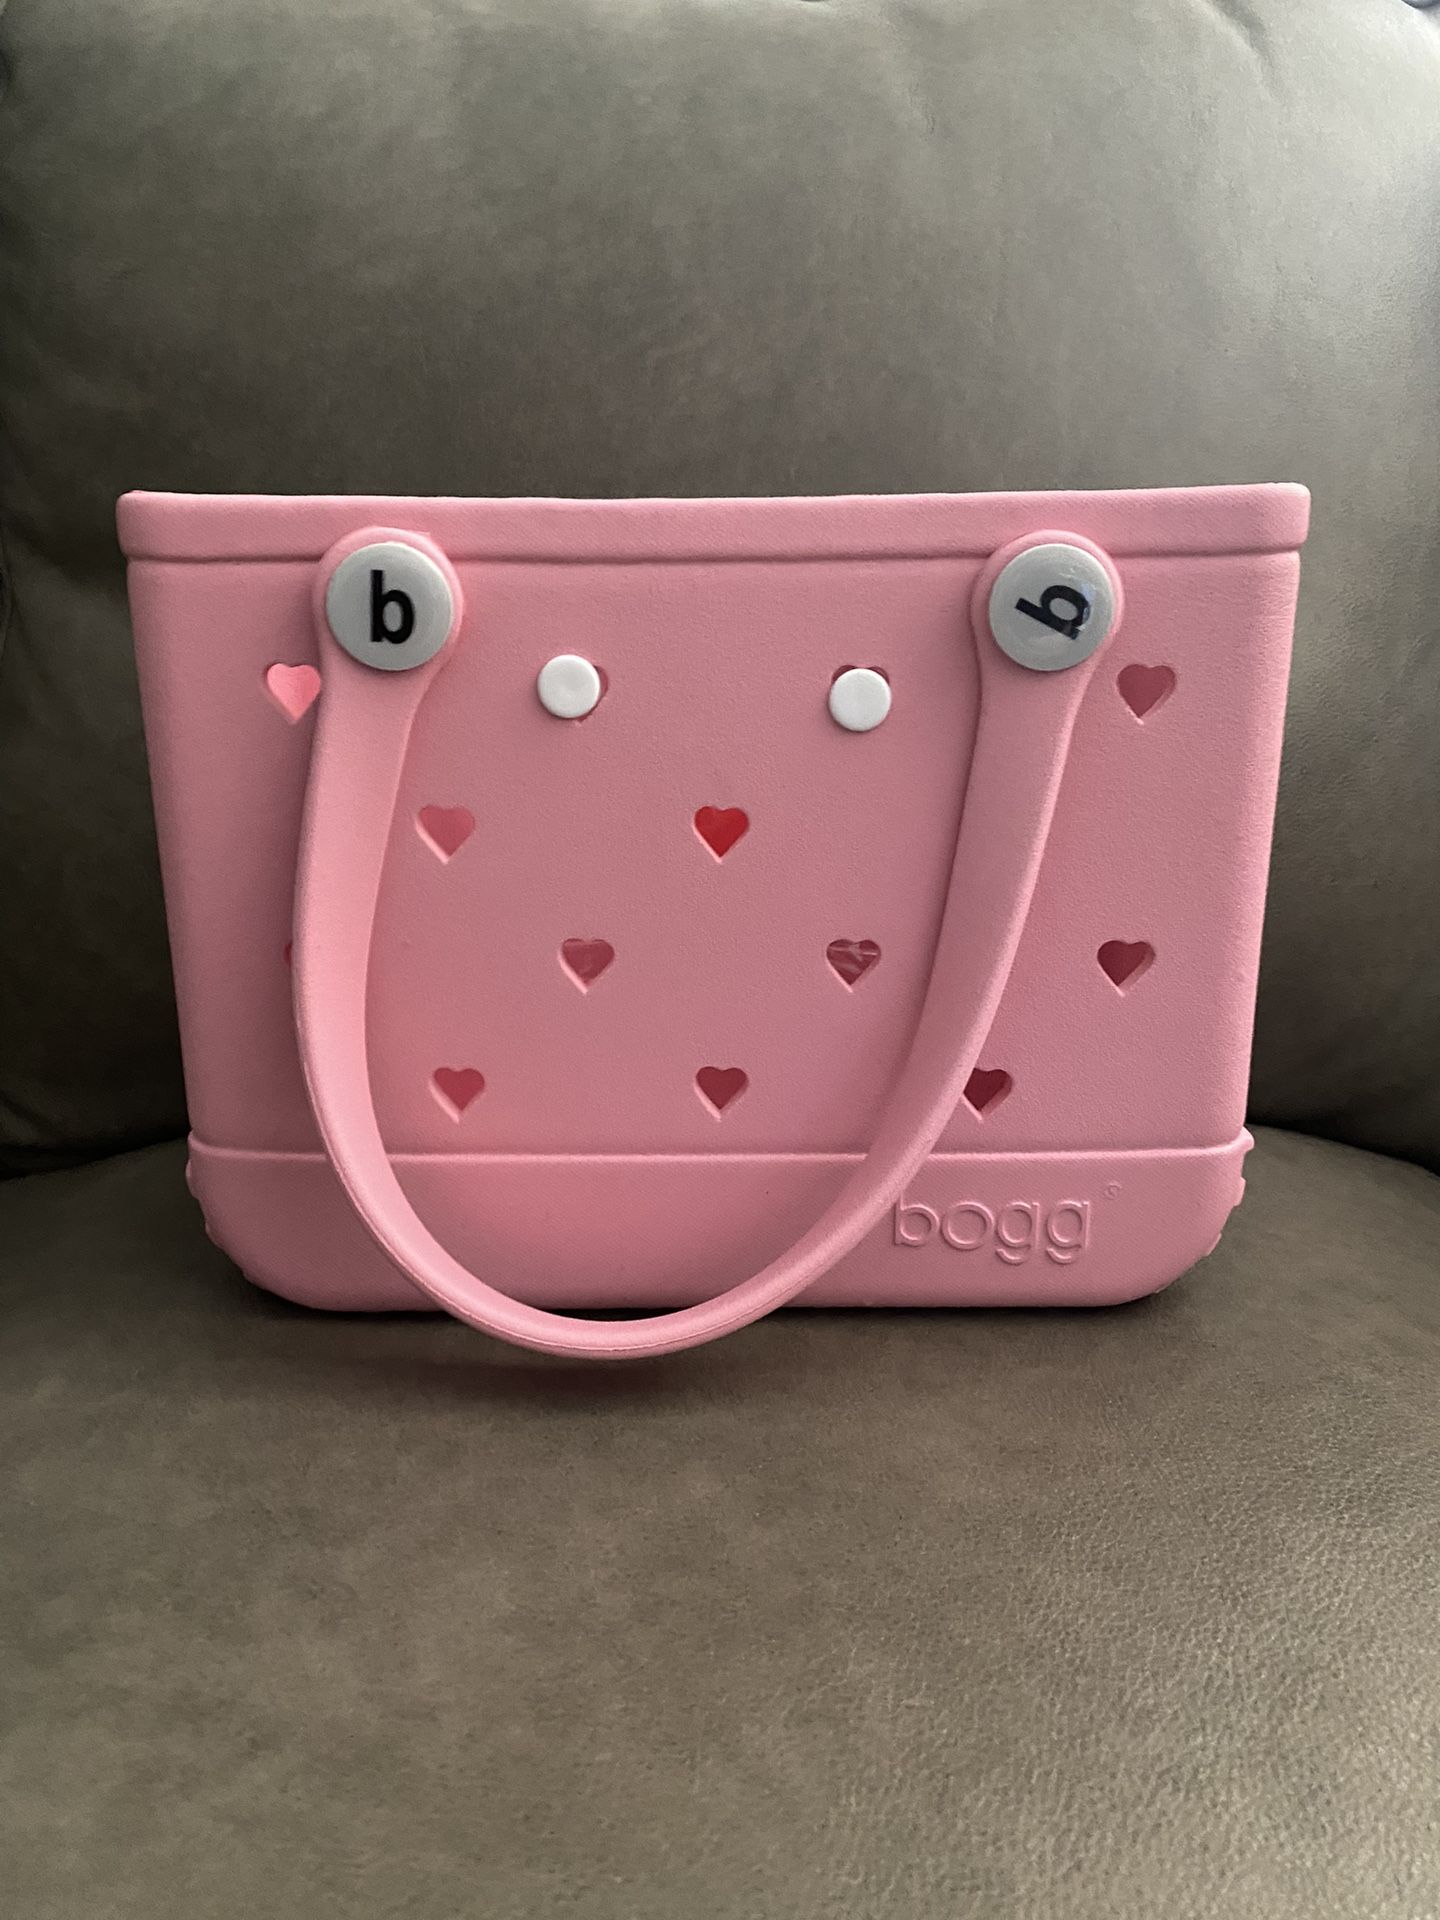 Limited Edition Valentine’s Day Bitty Bogg Bag